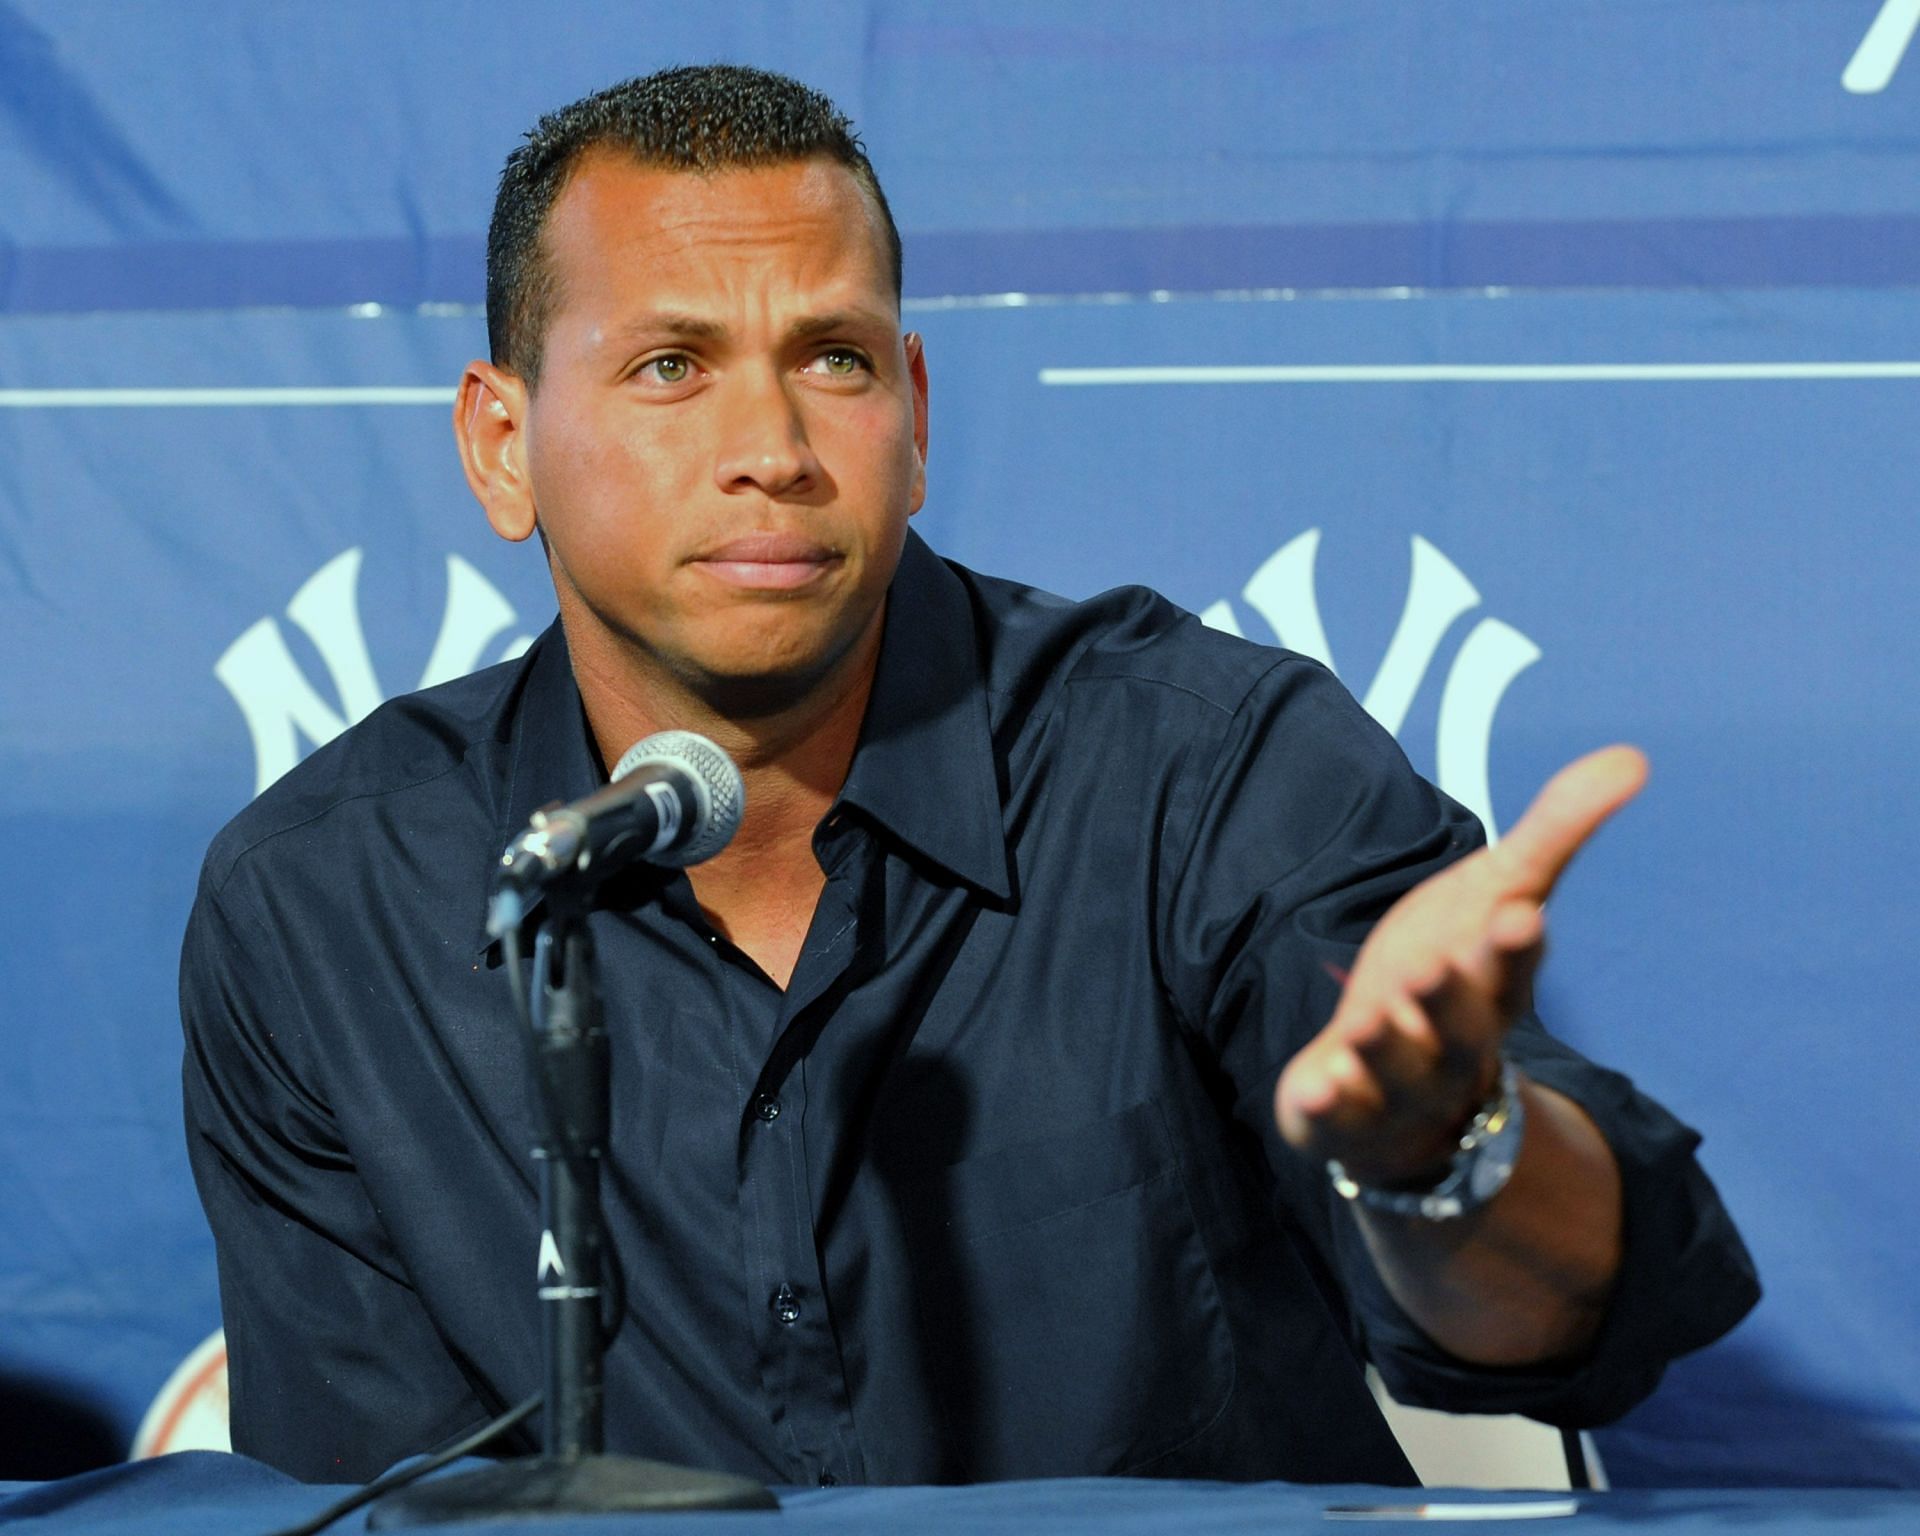 Alex Rodriguez Holds Press Conference About Steroid Use